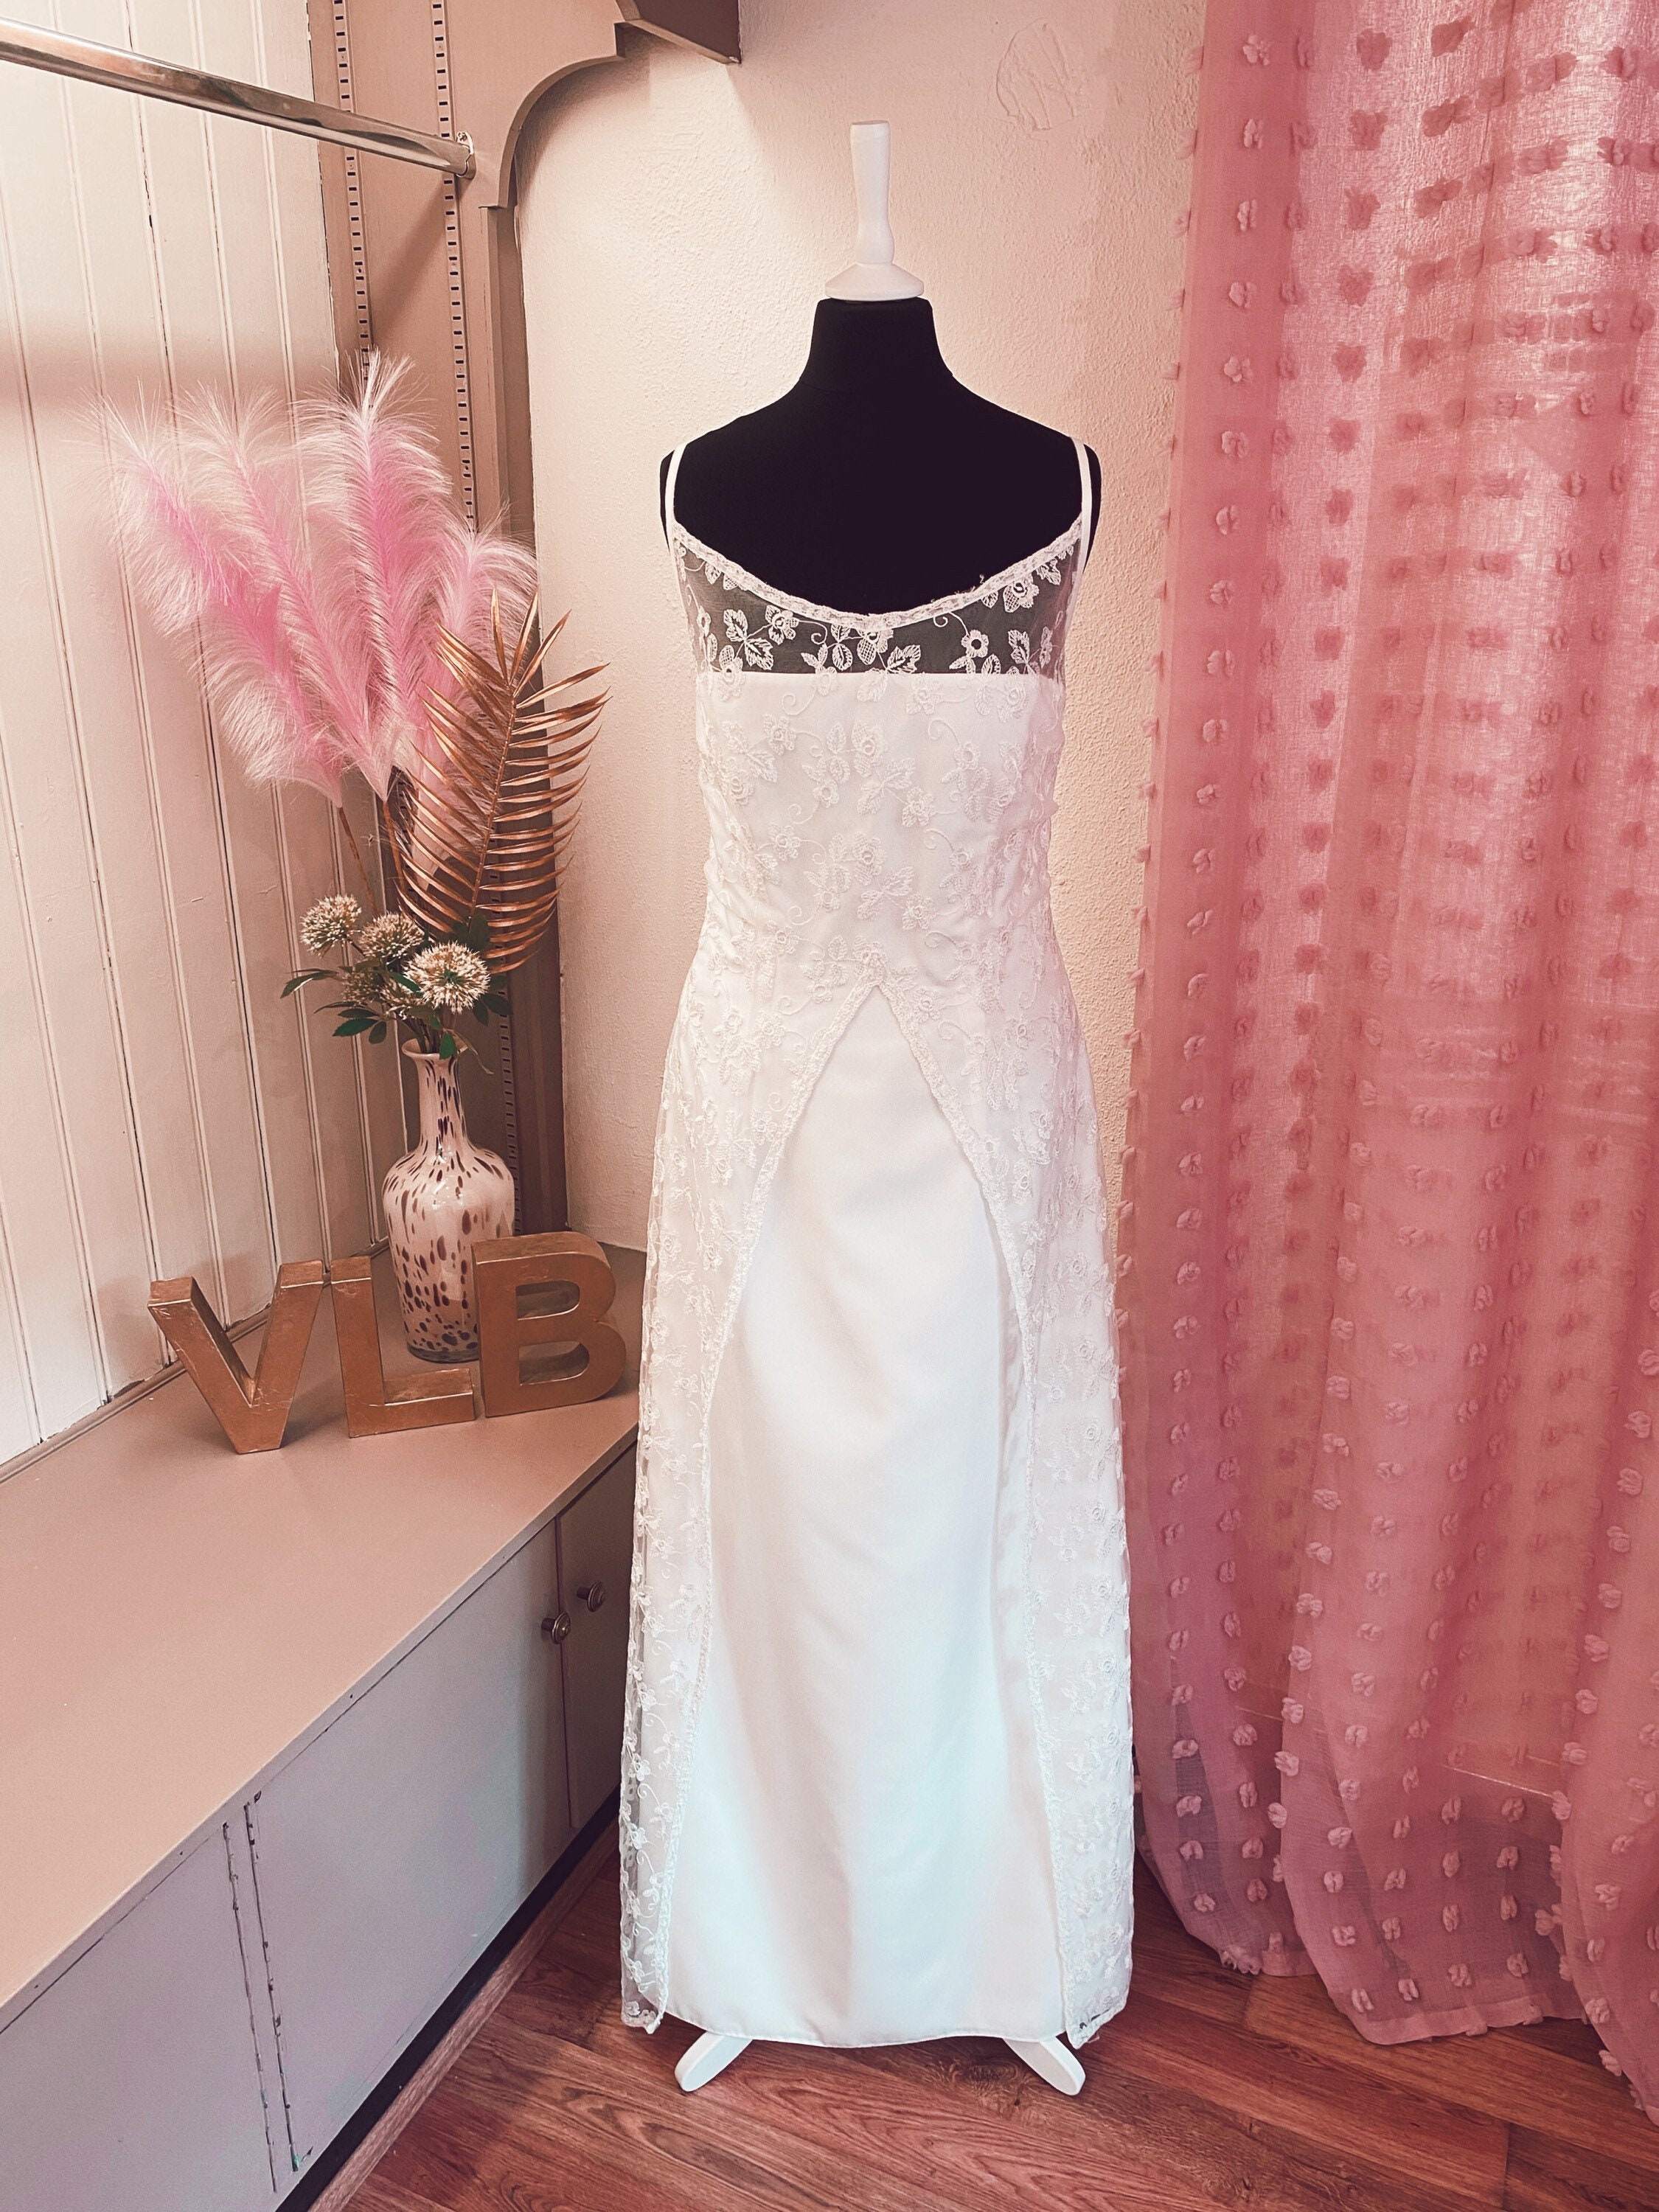 Plus Size Satin Wedding Dress With Lace Sleeves, A Line Satin